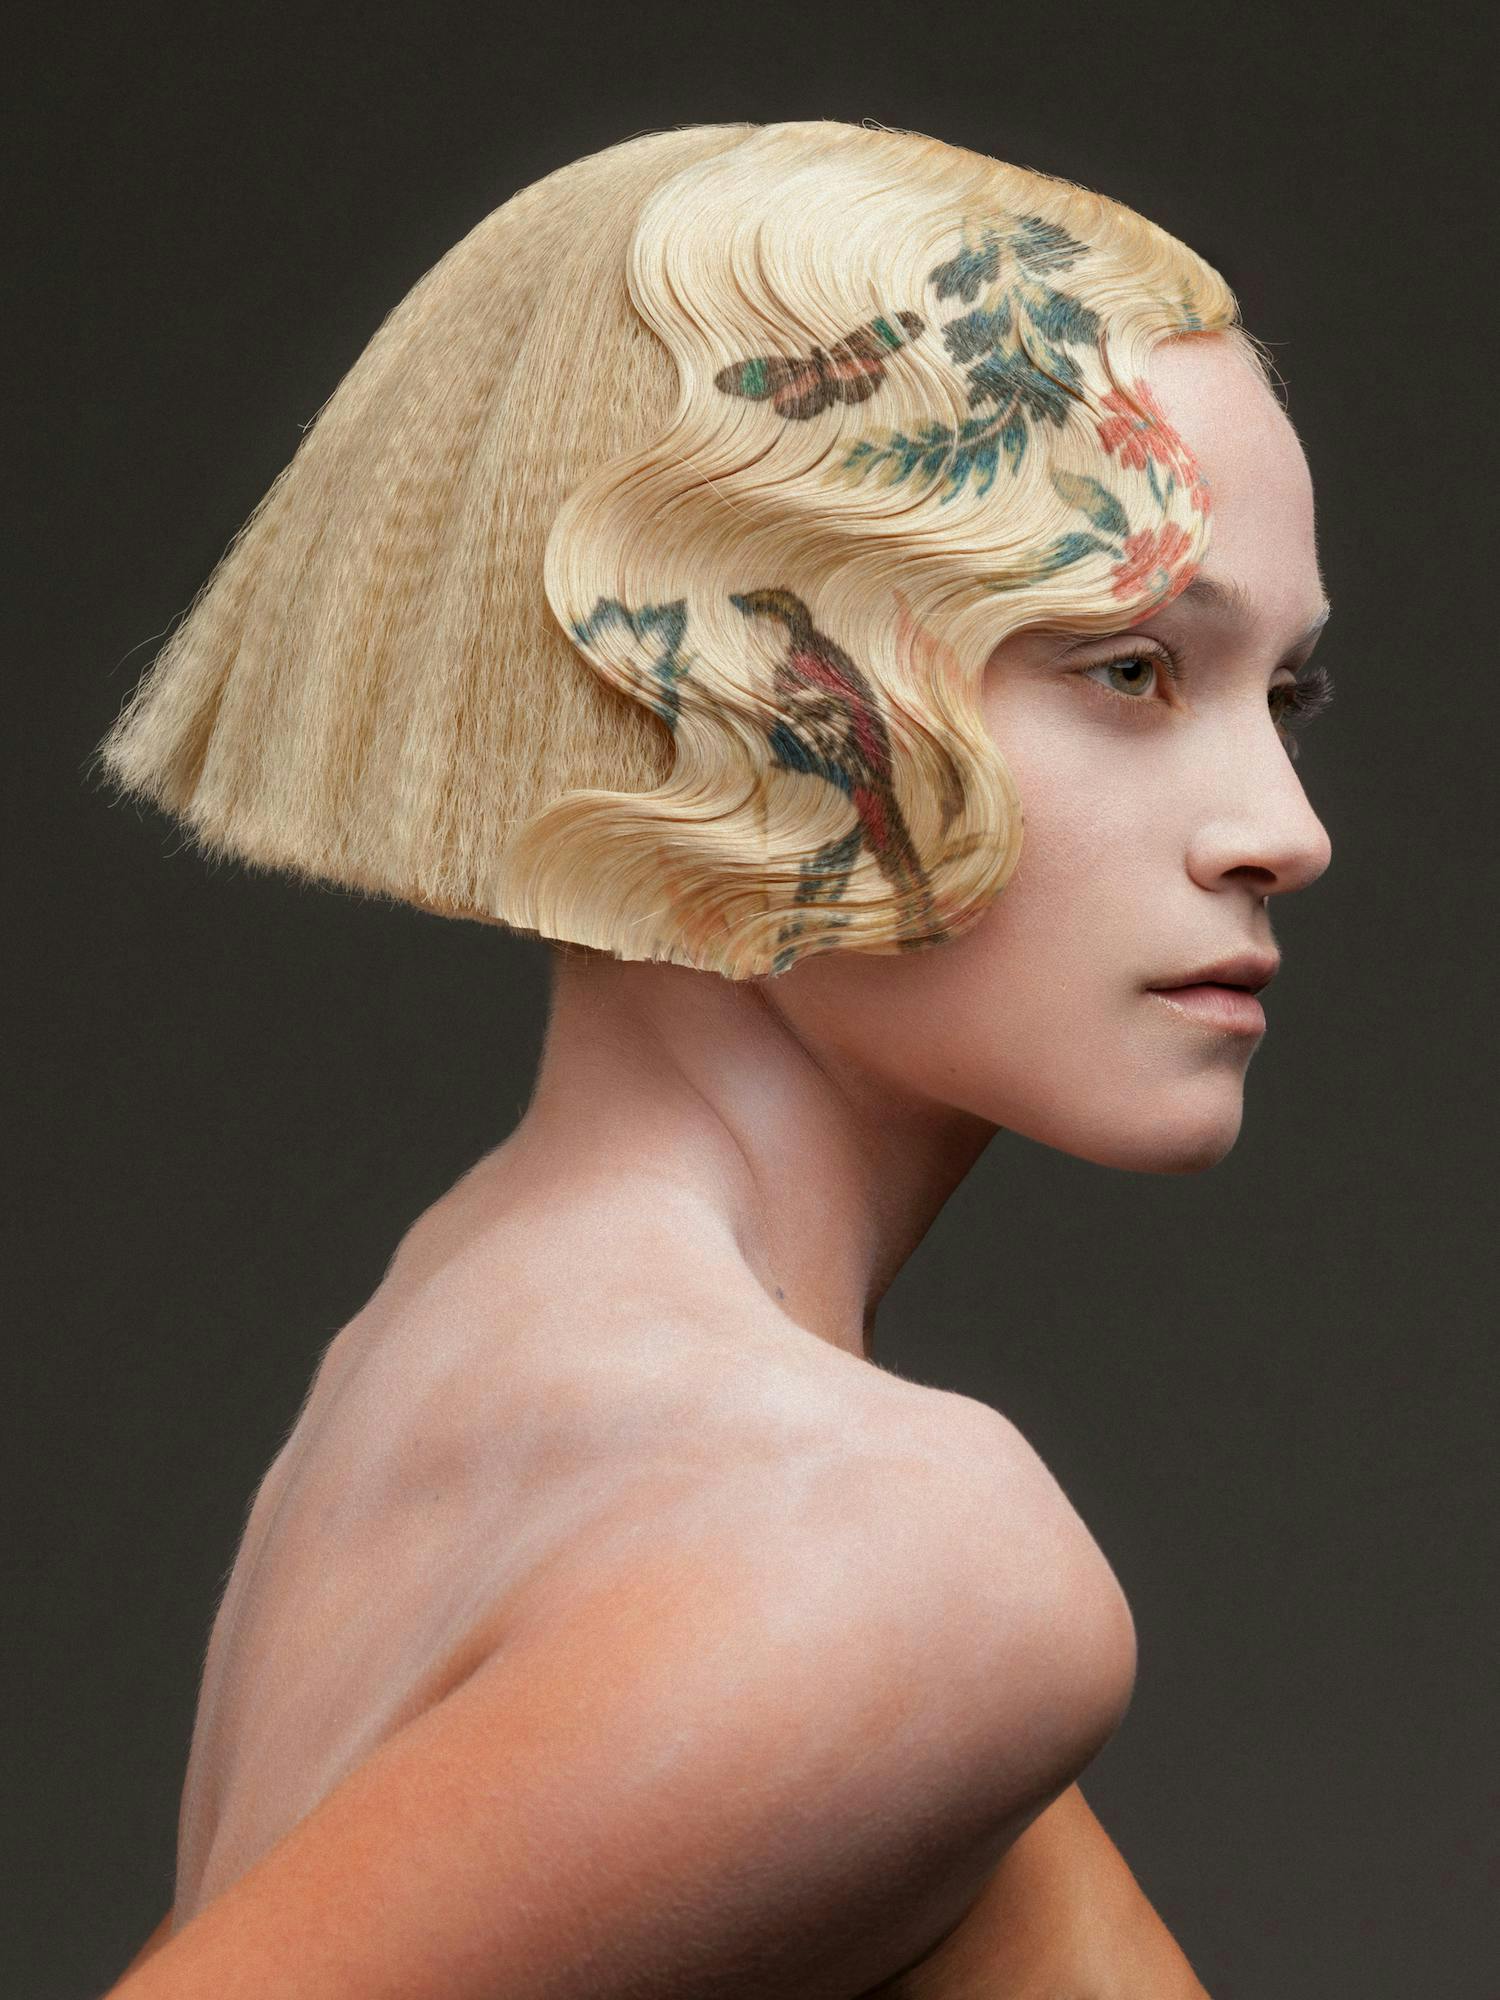 Blonde model with graphic designs on her hair.